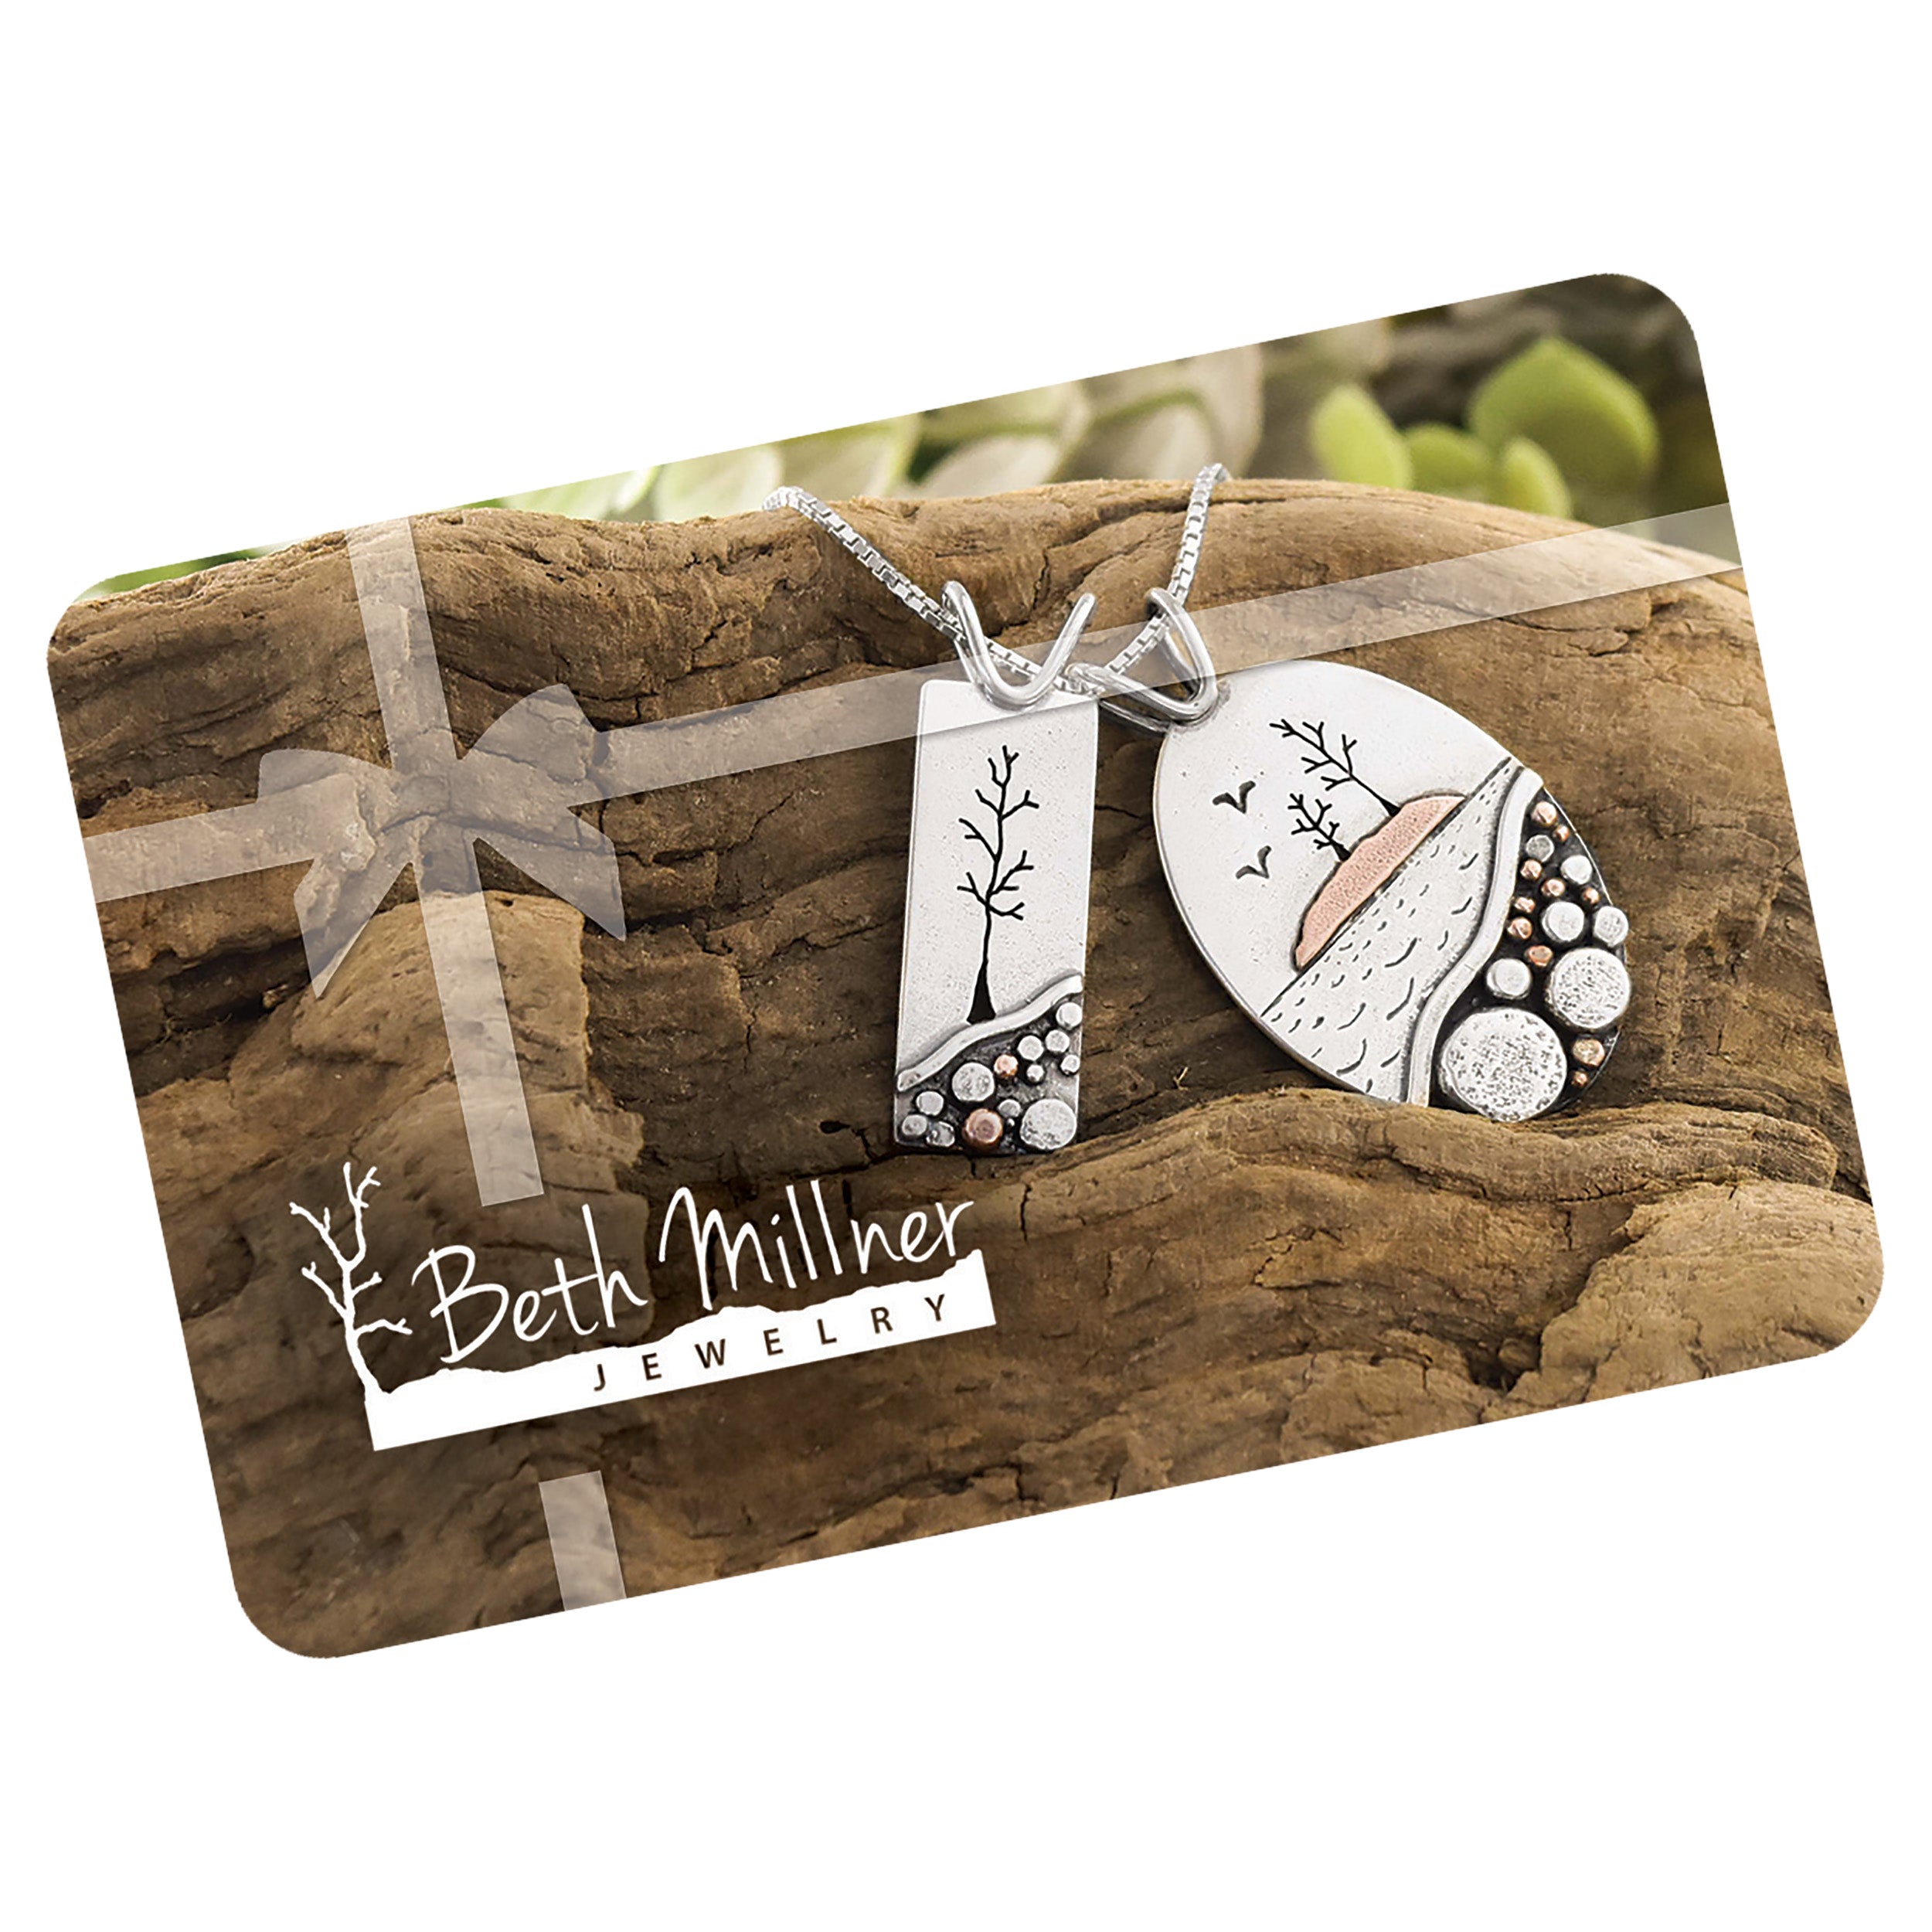 Other handcrafted at Beth Millner Jewelry